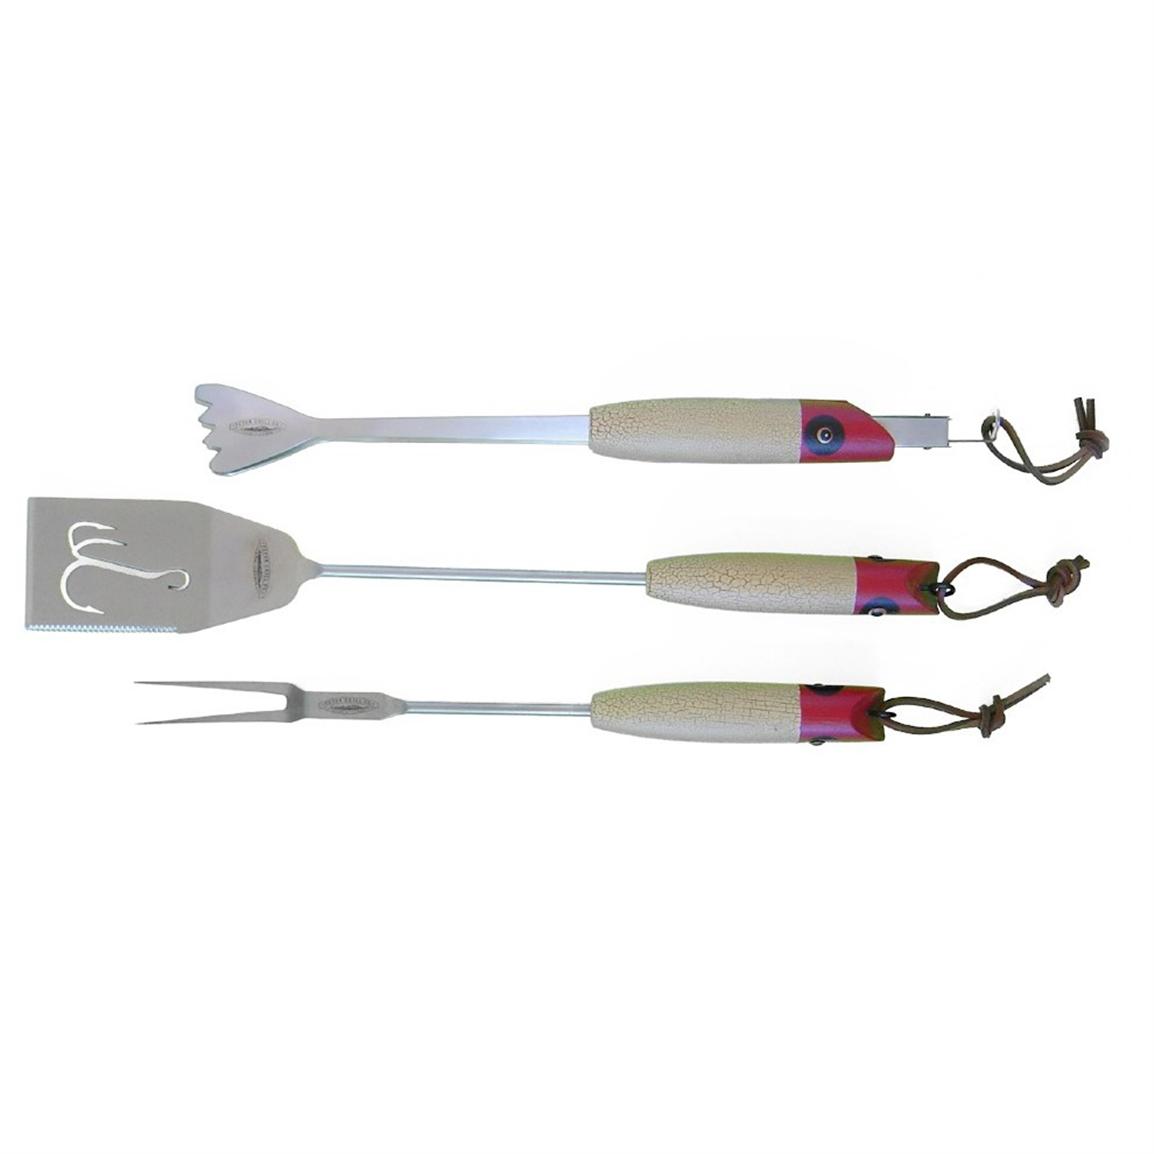 Teton Grill Co. Fishing Grill Utensils - 202541, Grills & Smokers at Sportsman's Guide